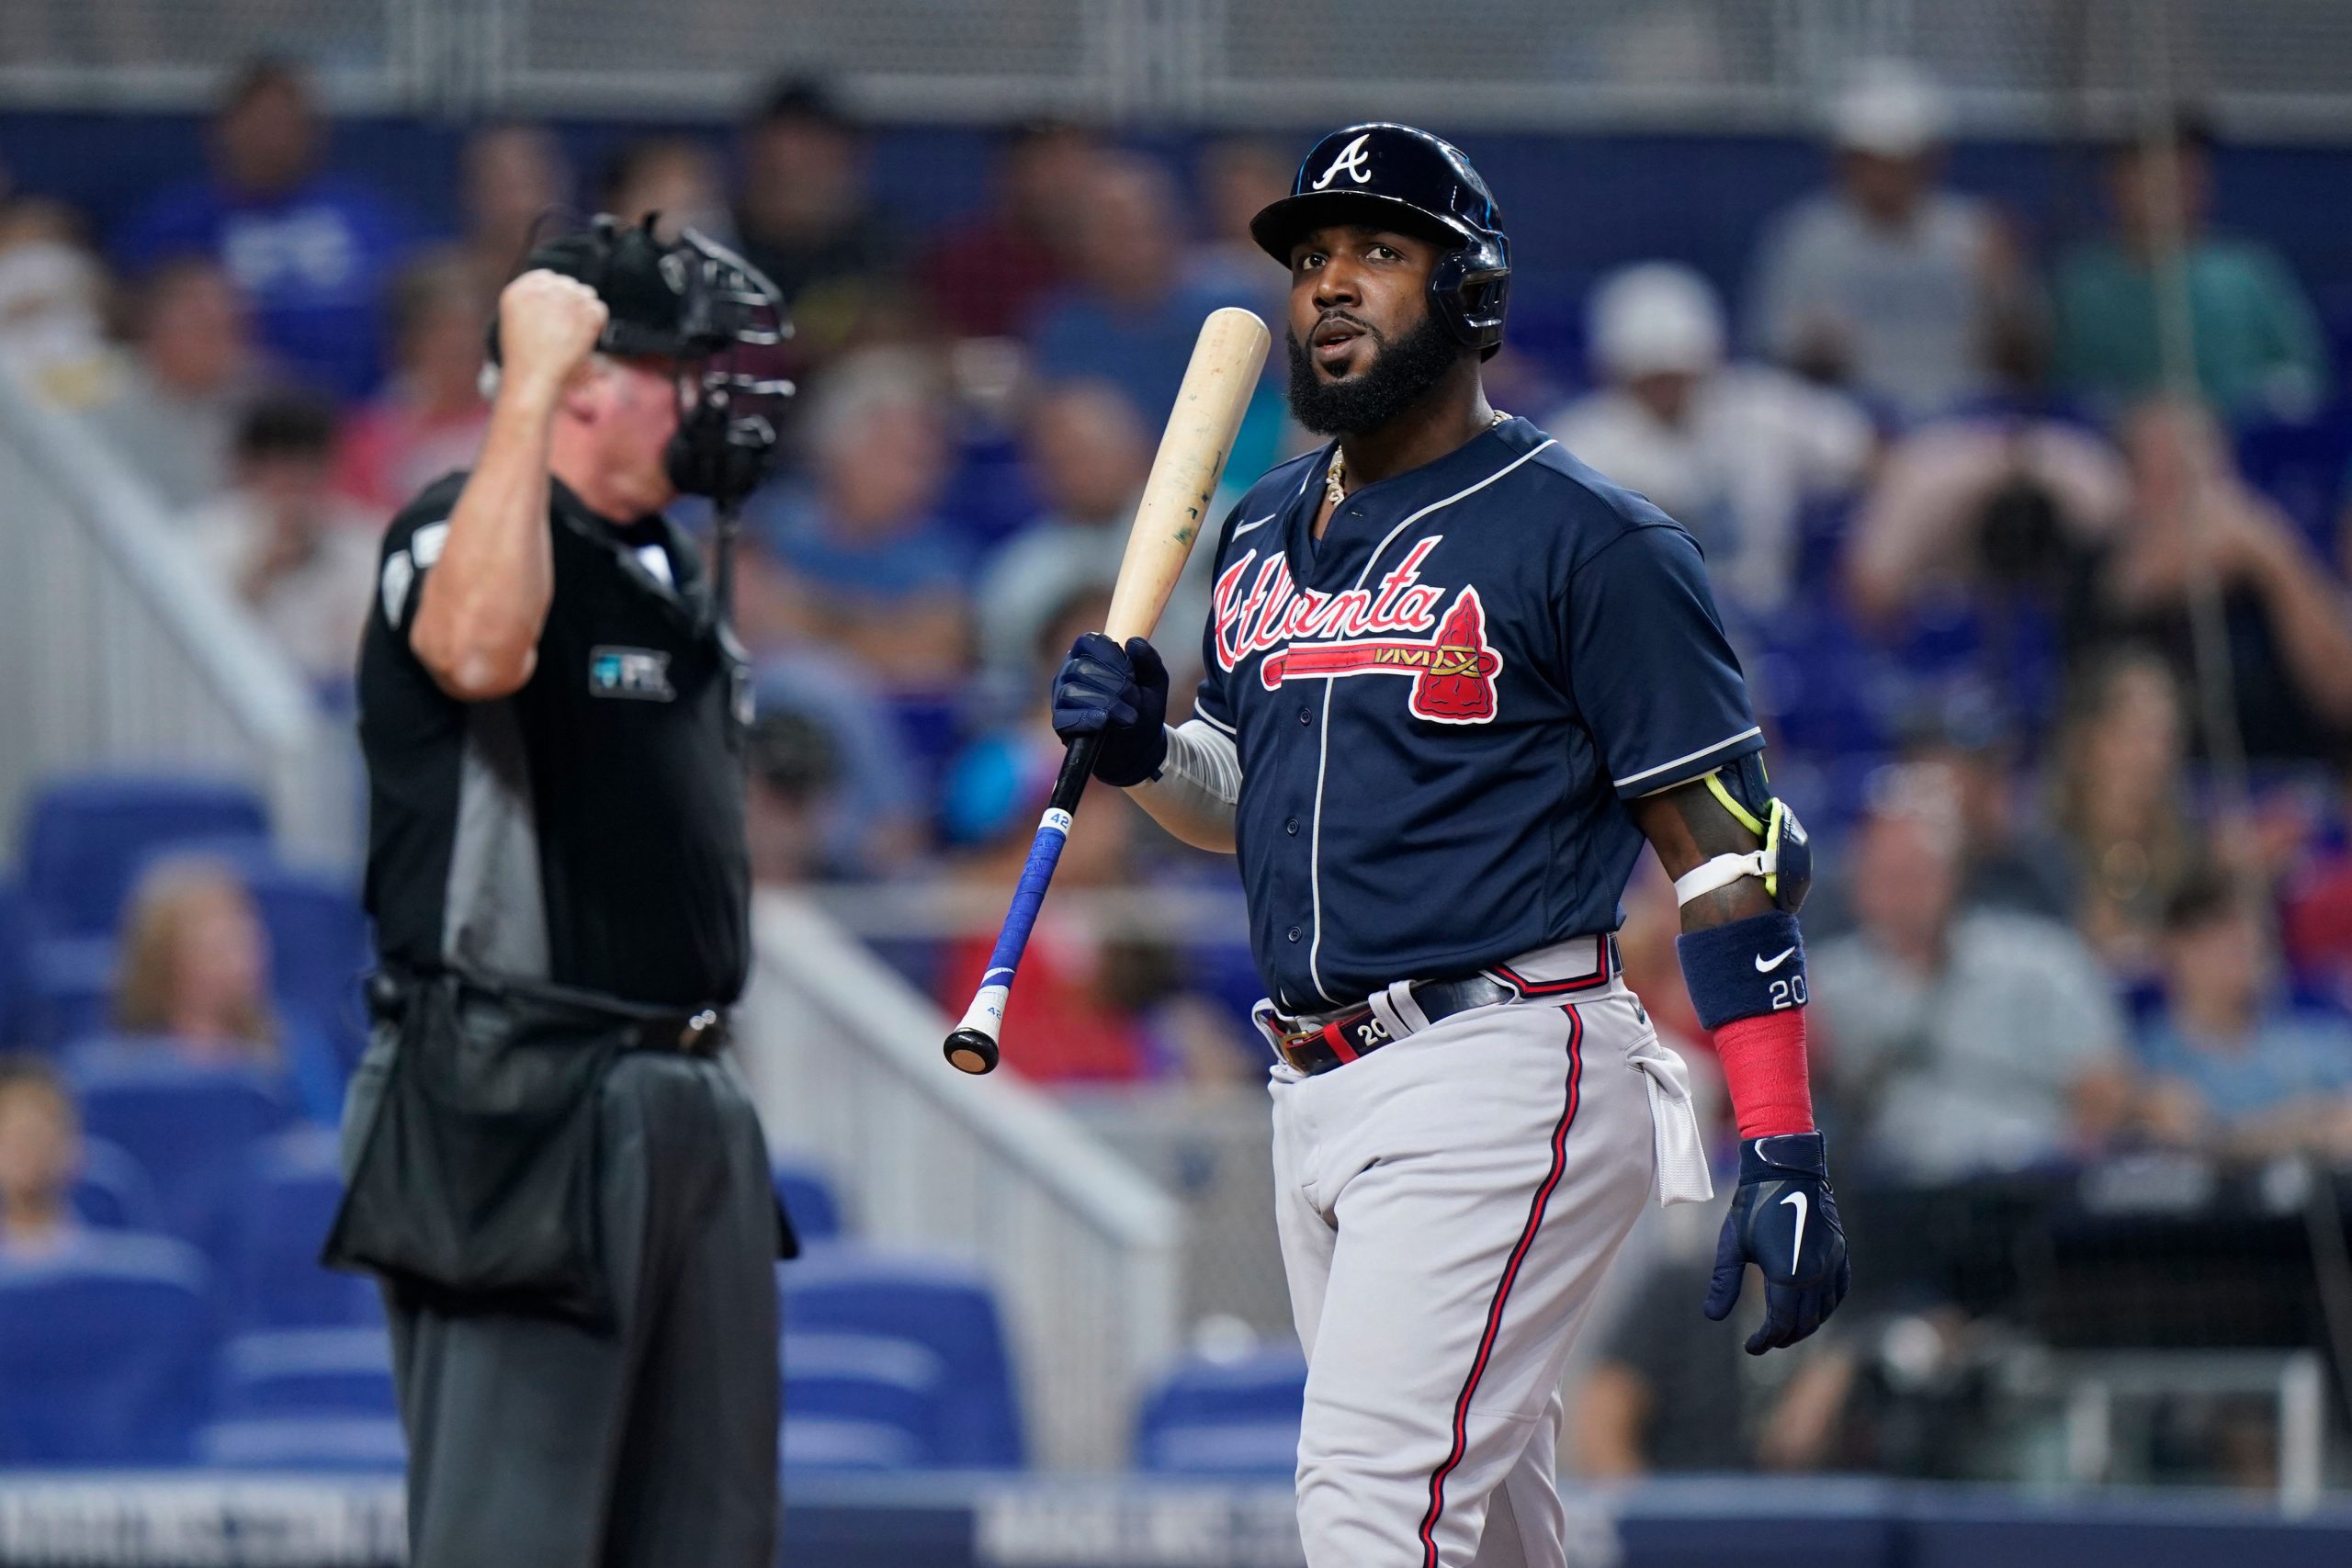 ‘Disappointed’ Atlanta Braves react to outfielder Marcell Ozuna’s DUI arrest